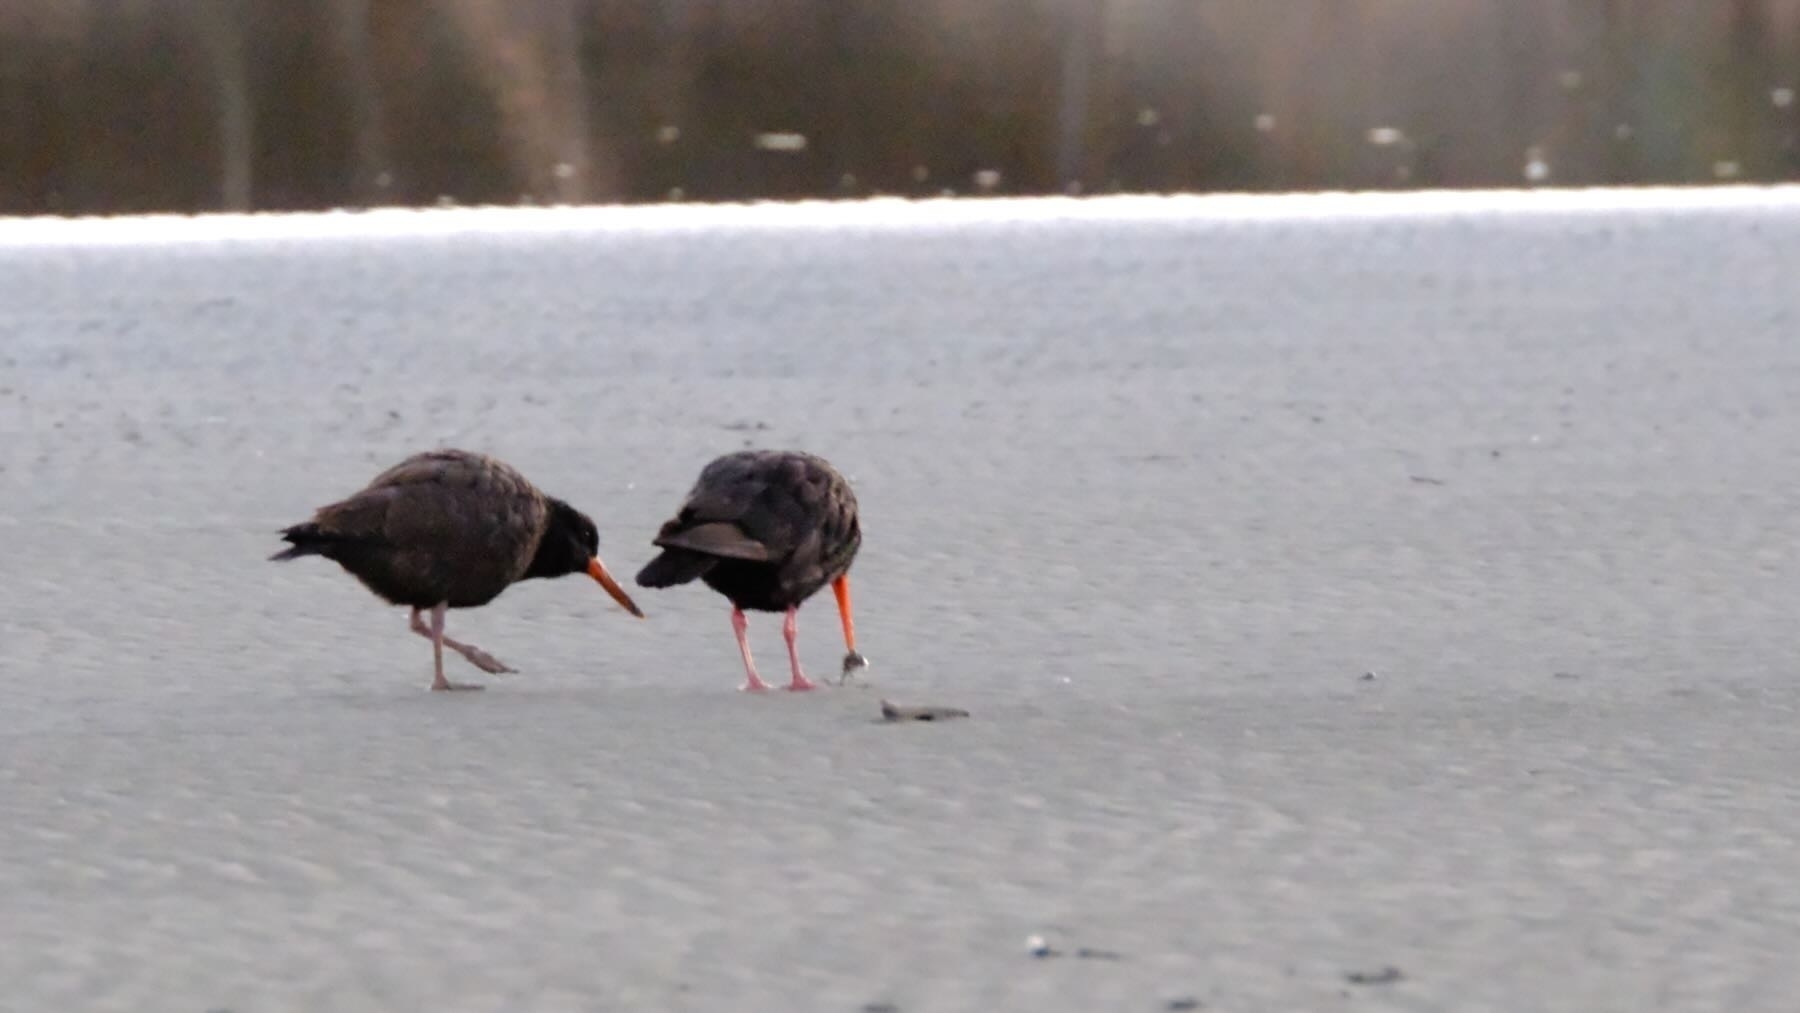 Oystercatcher with a tasty grub, and a friend, possibly an adult chick.